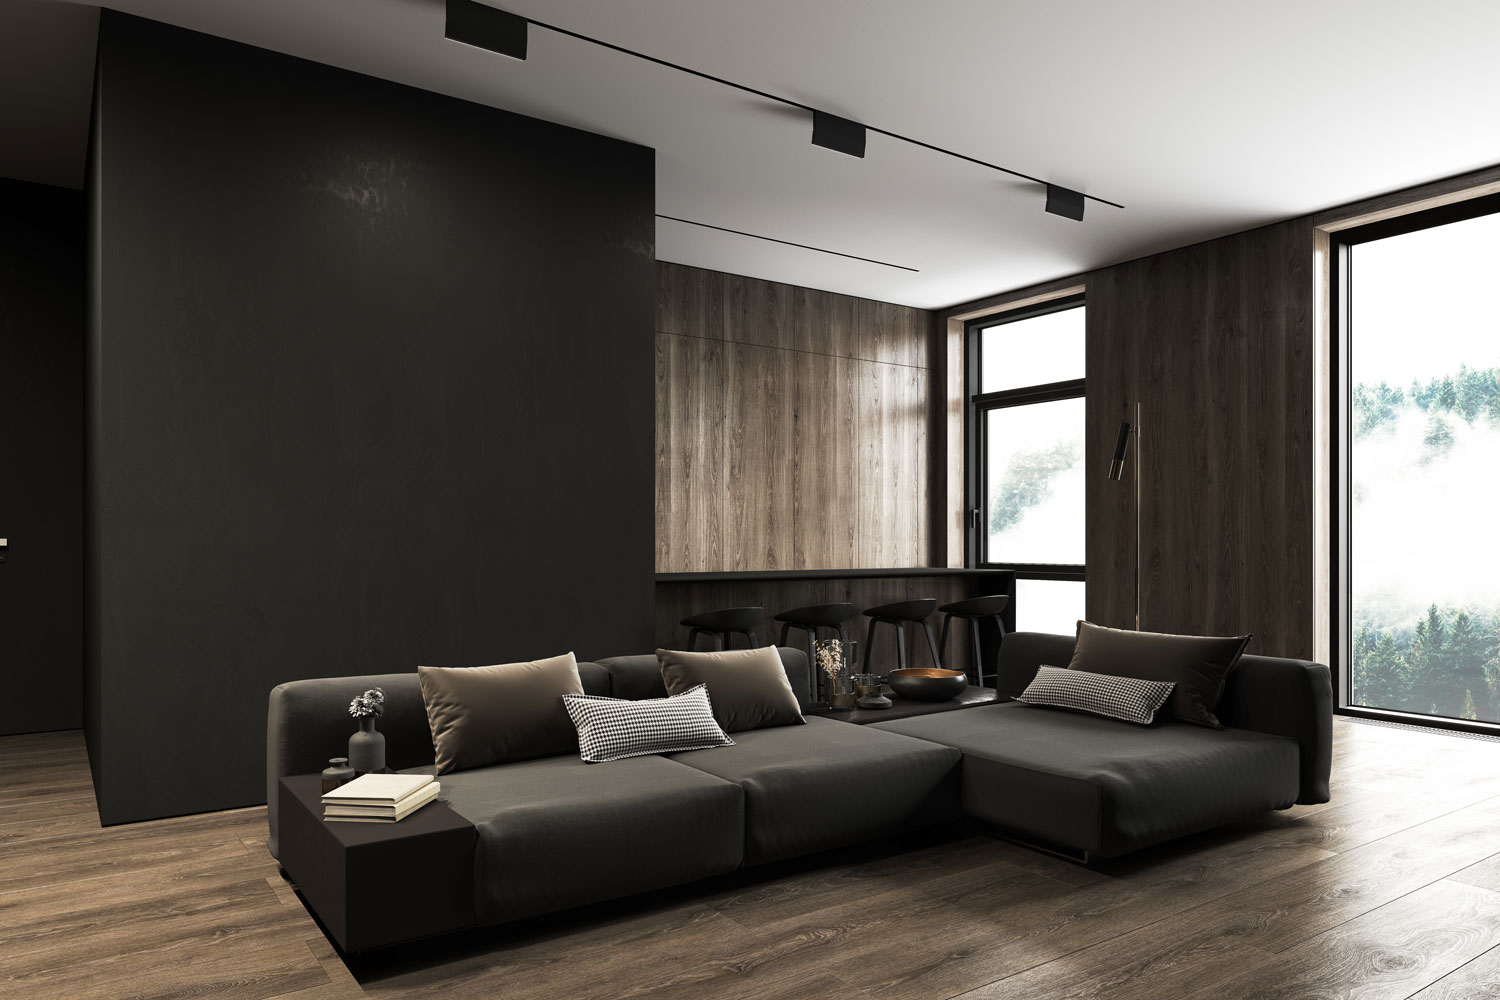 Ultra modern house living room with laminated flooring, black leather sectional sofa with a black wall